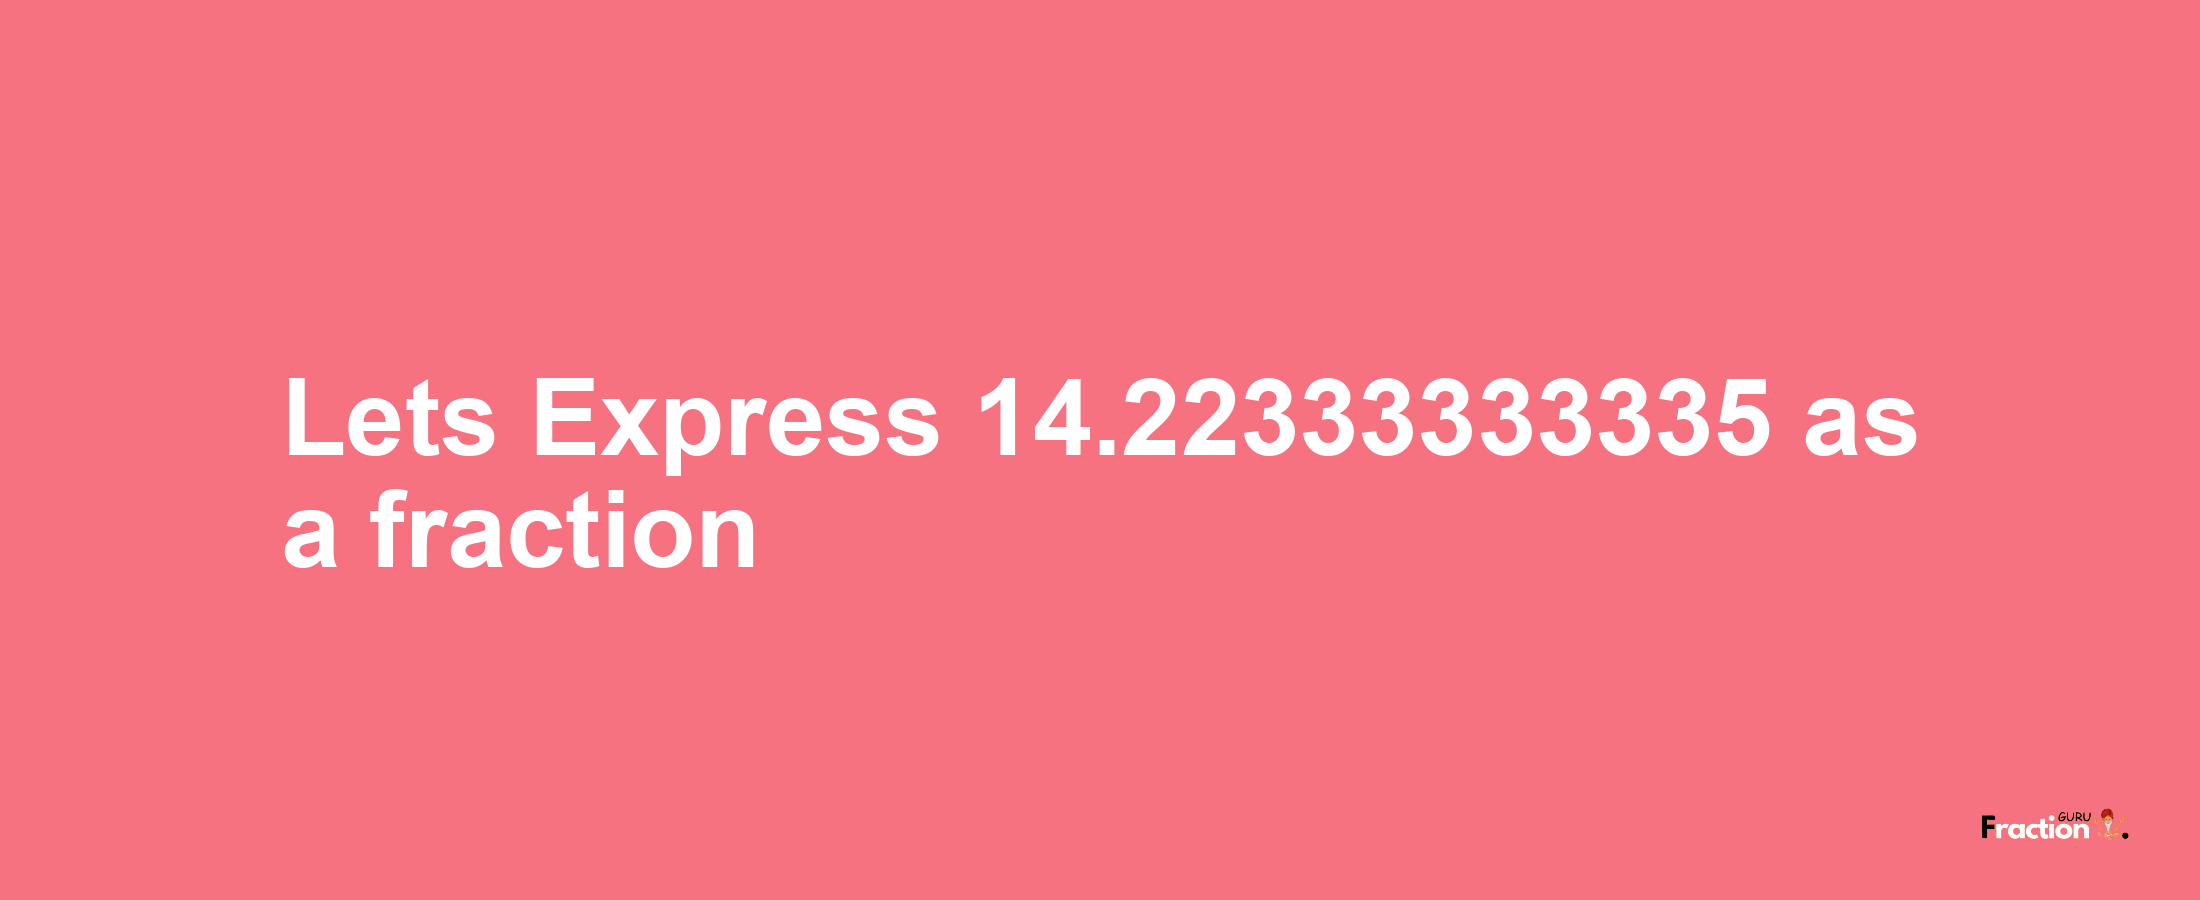 Lets Express 14.22333333335 as afraction